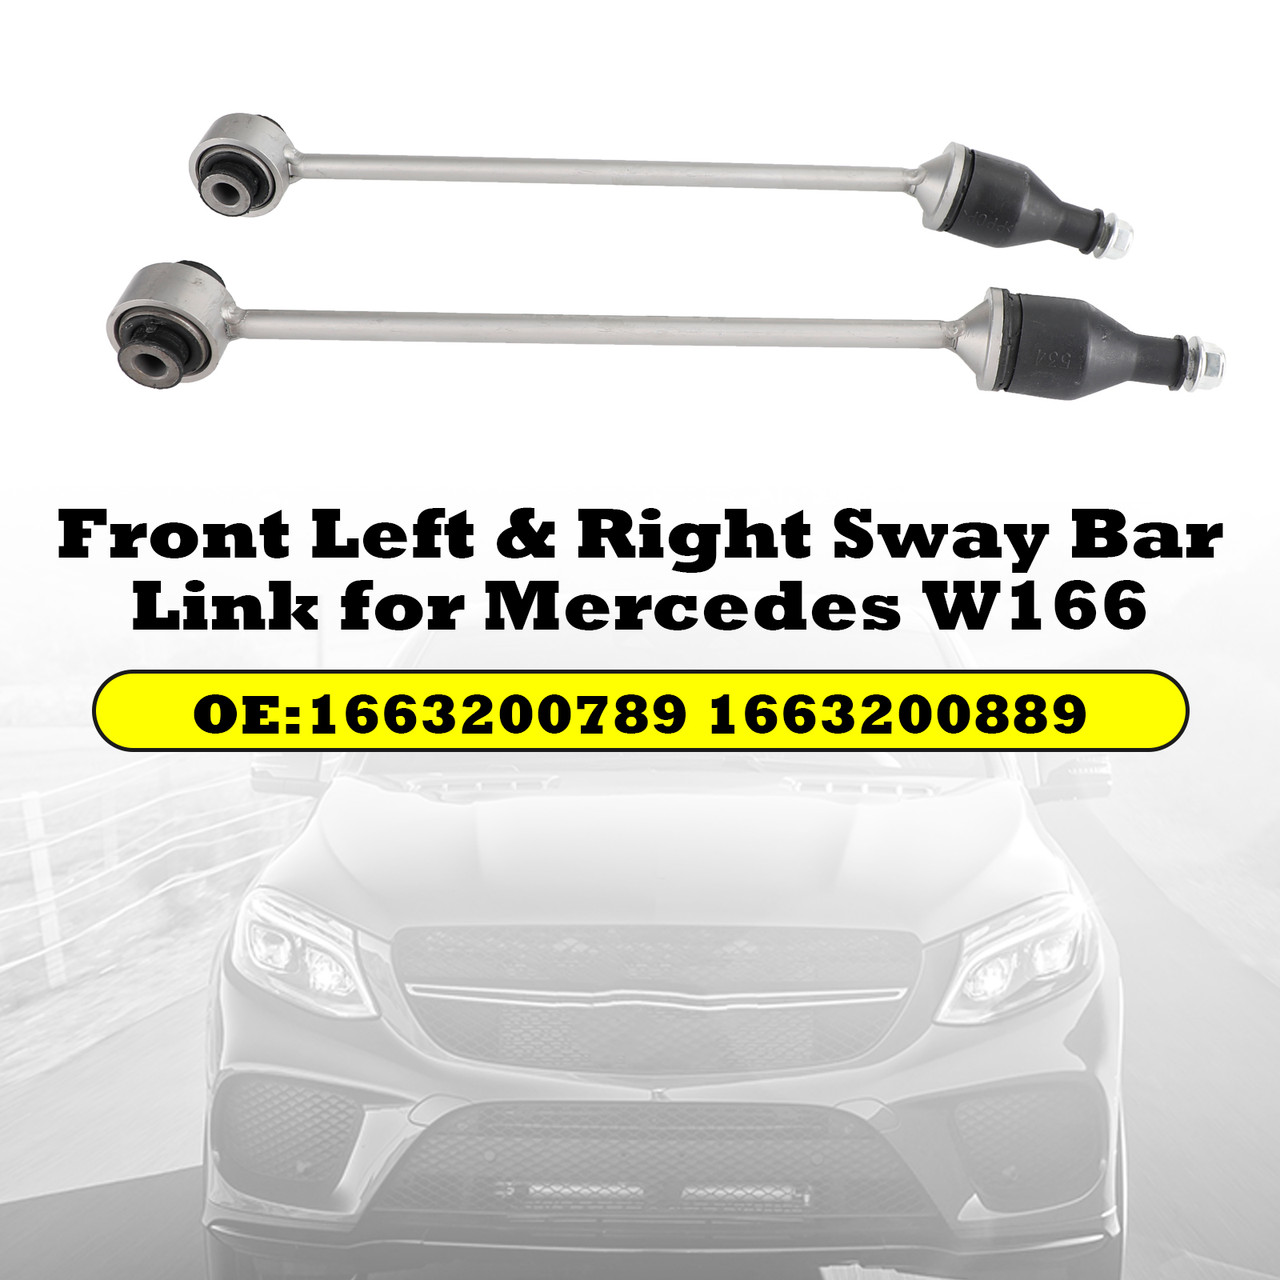 Front Left & Right Sway Bar Link for Mercedes W166 1663200789 1663200889